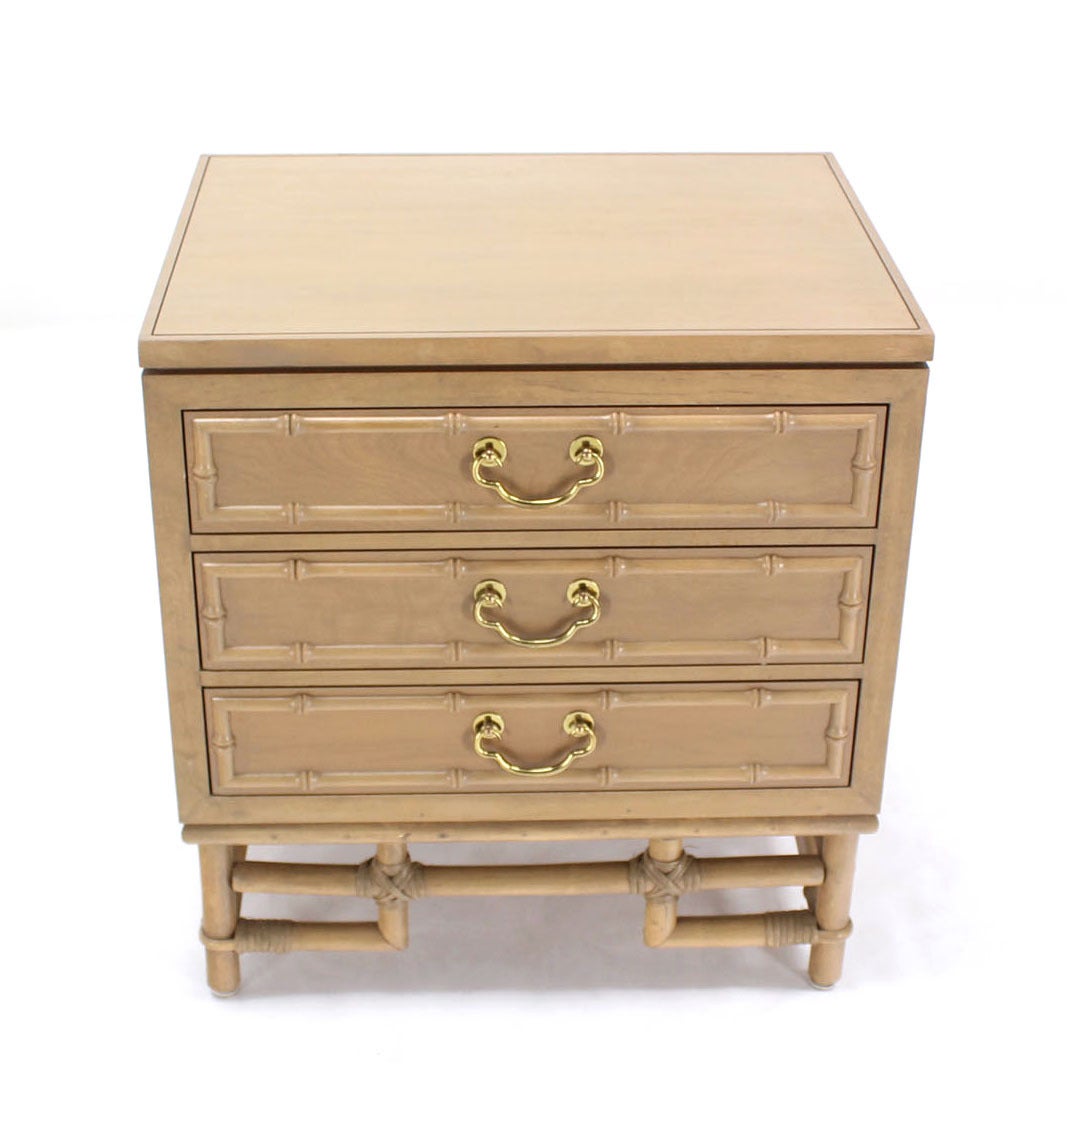 American Faux Bamboo Three Drawer Petite Beige Lacquer Chest Dresser Brass Pulls